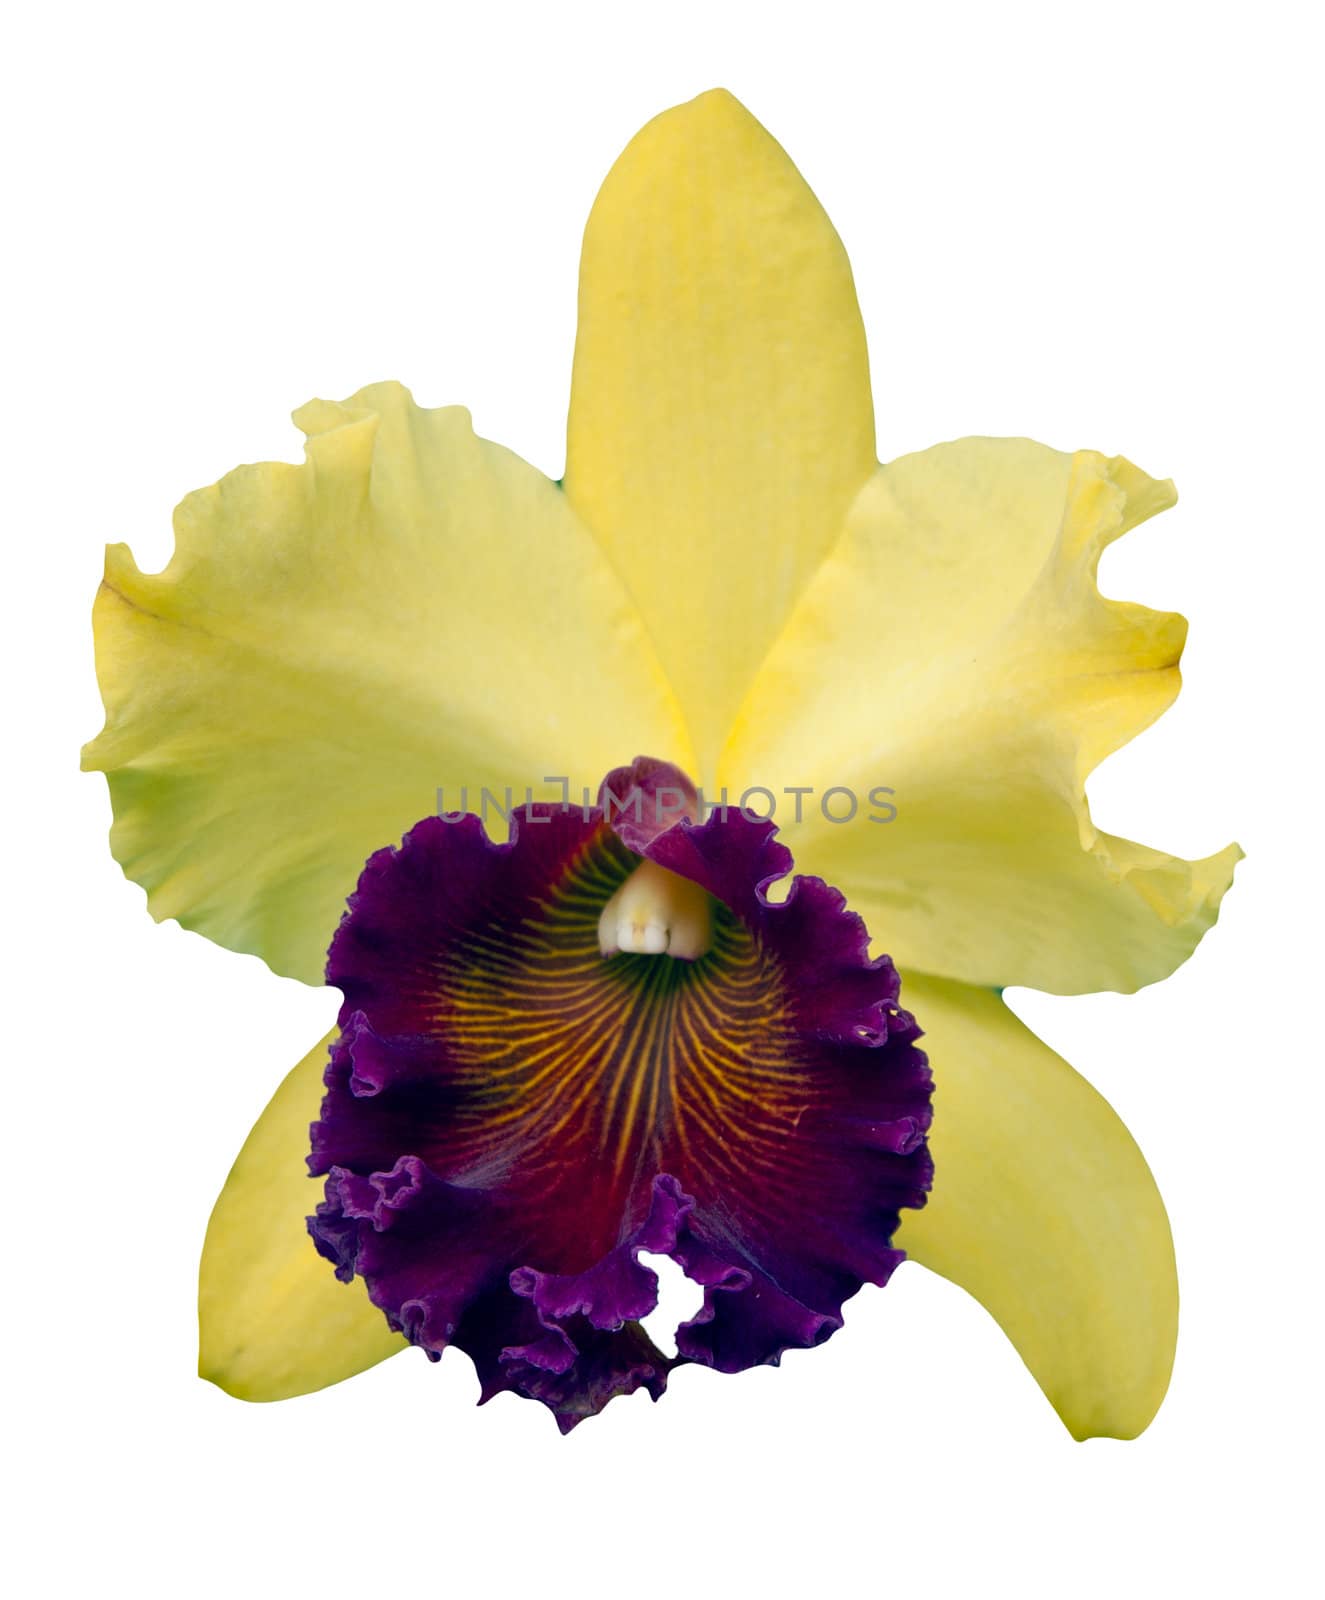 Yellow and purple orchid on white background by khellon